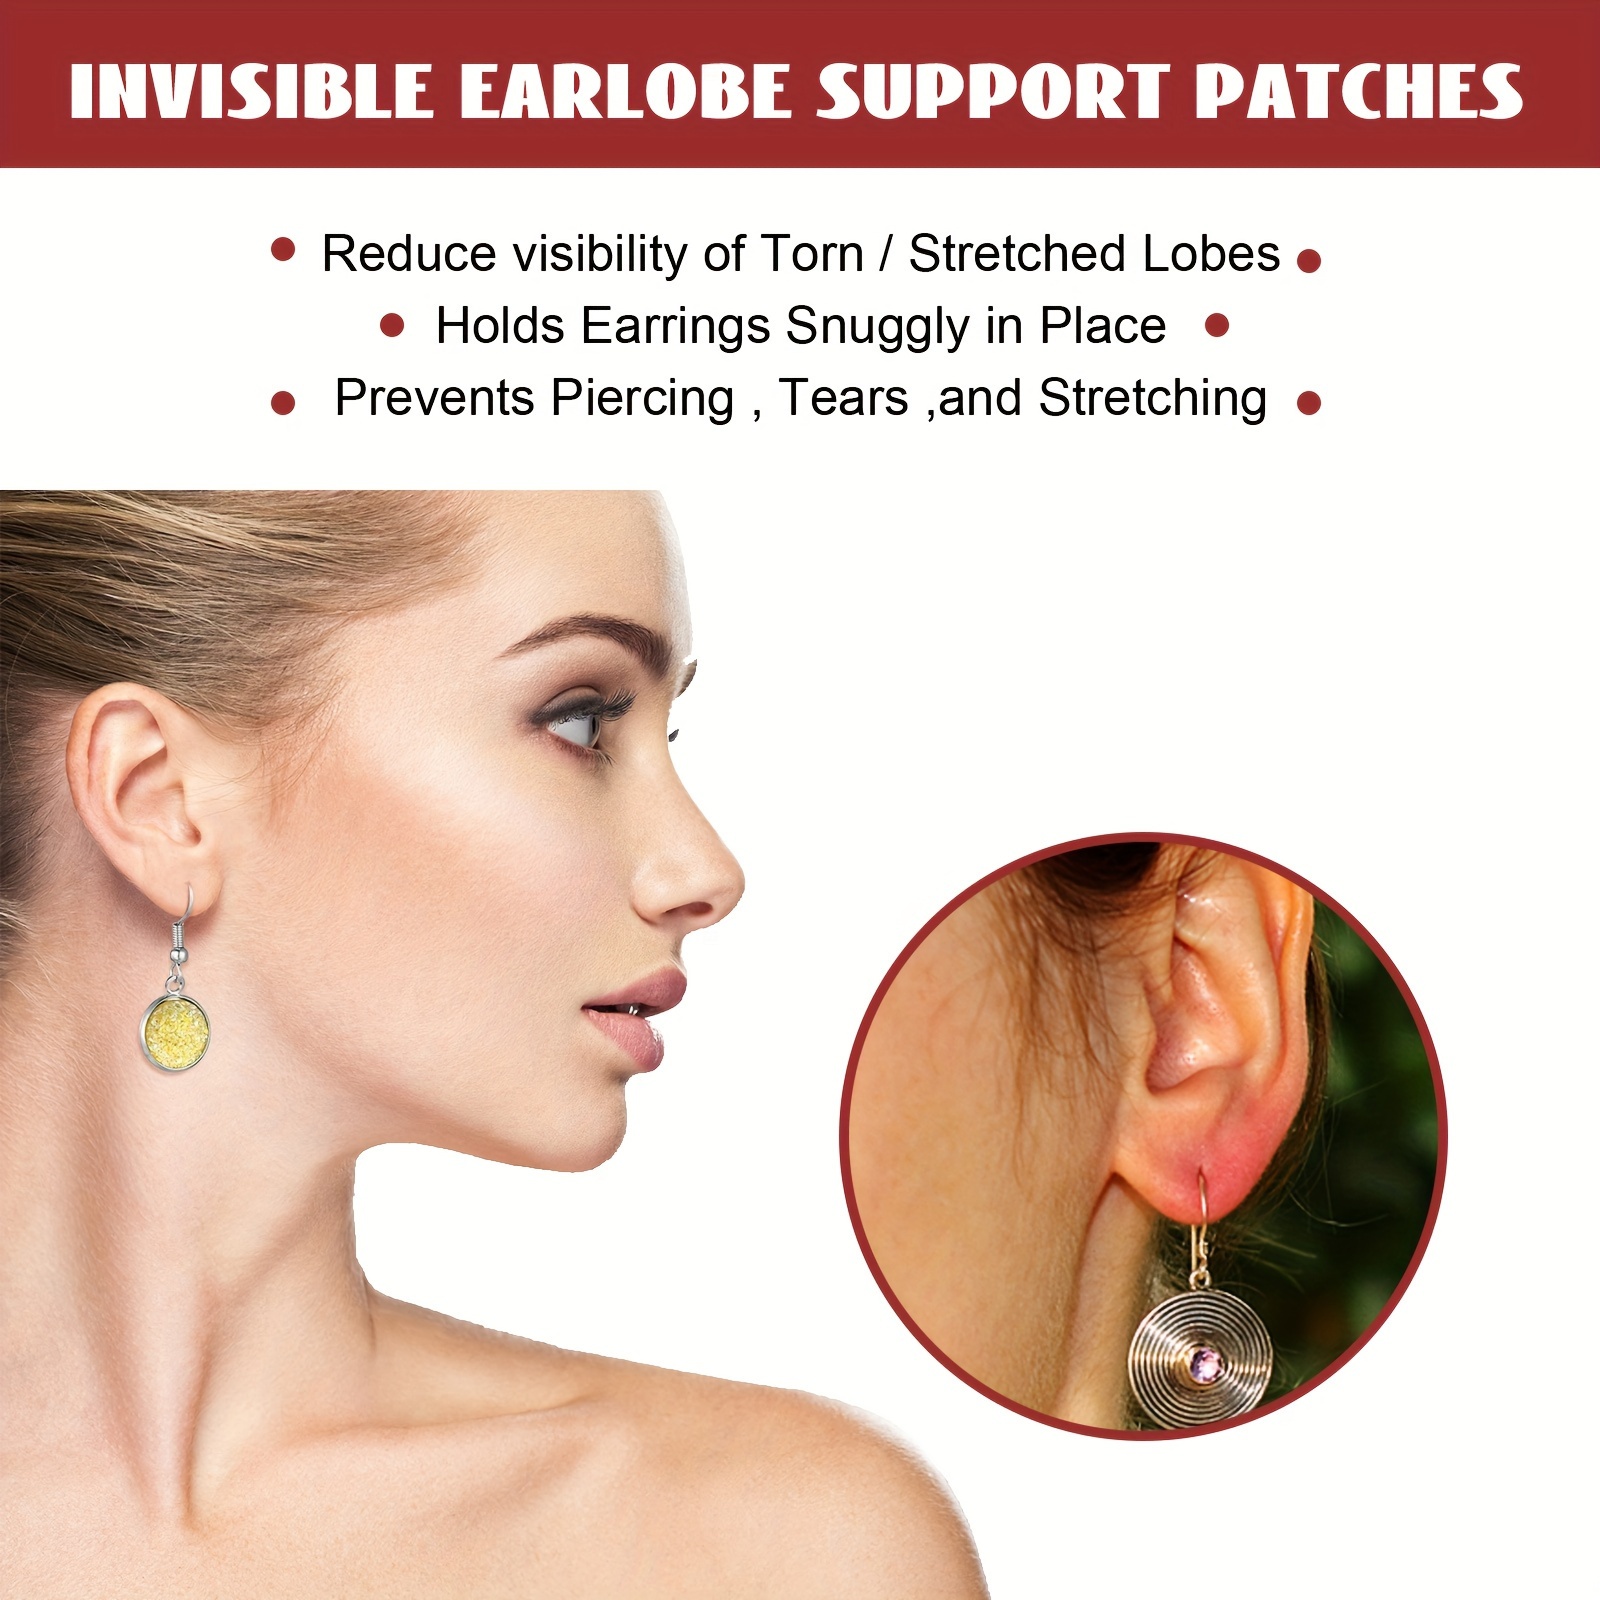 50pcs Ear Lobe Support Patches Invisible Ear Patches Large Earring